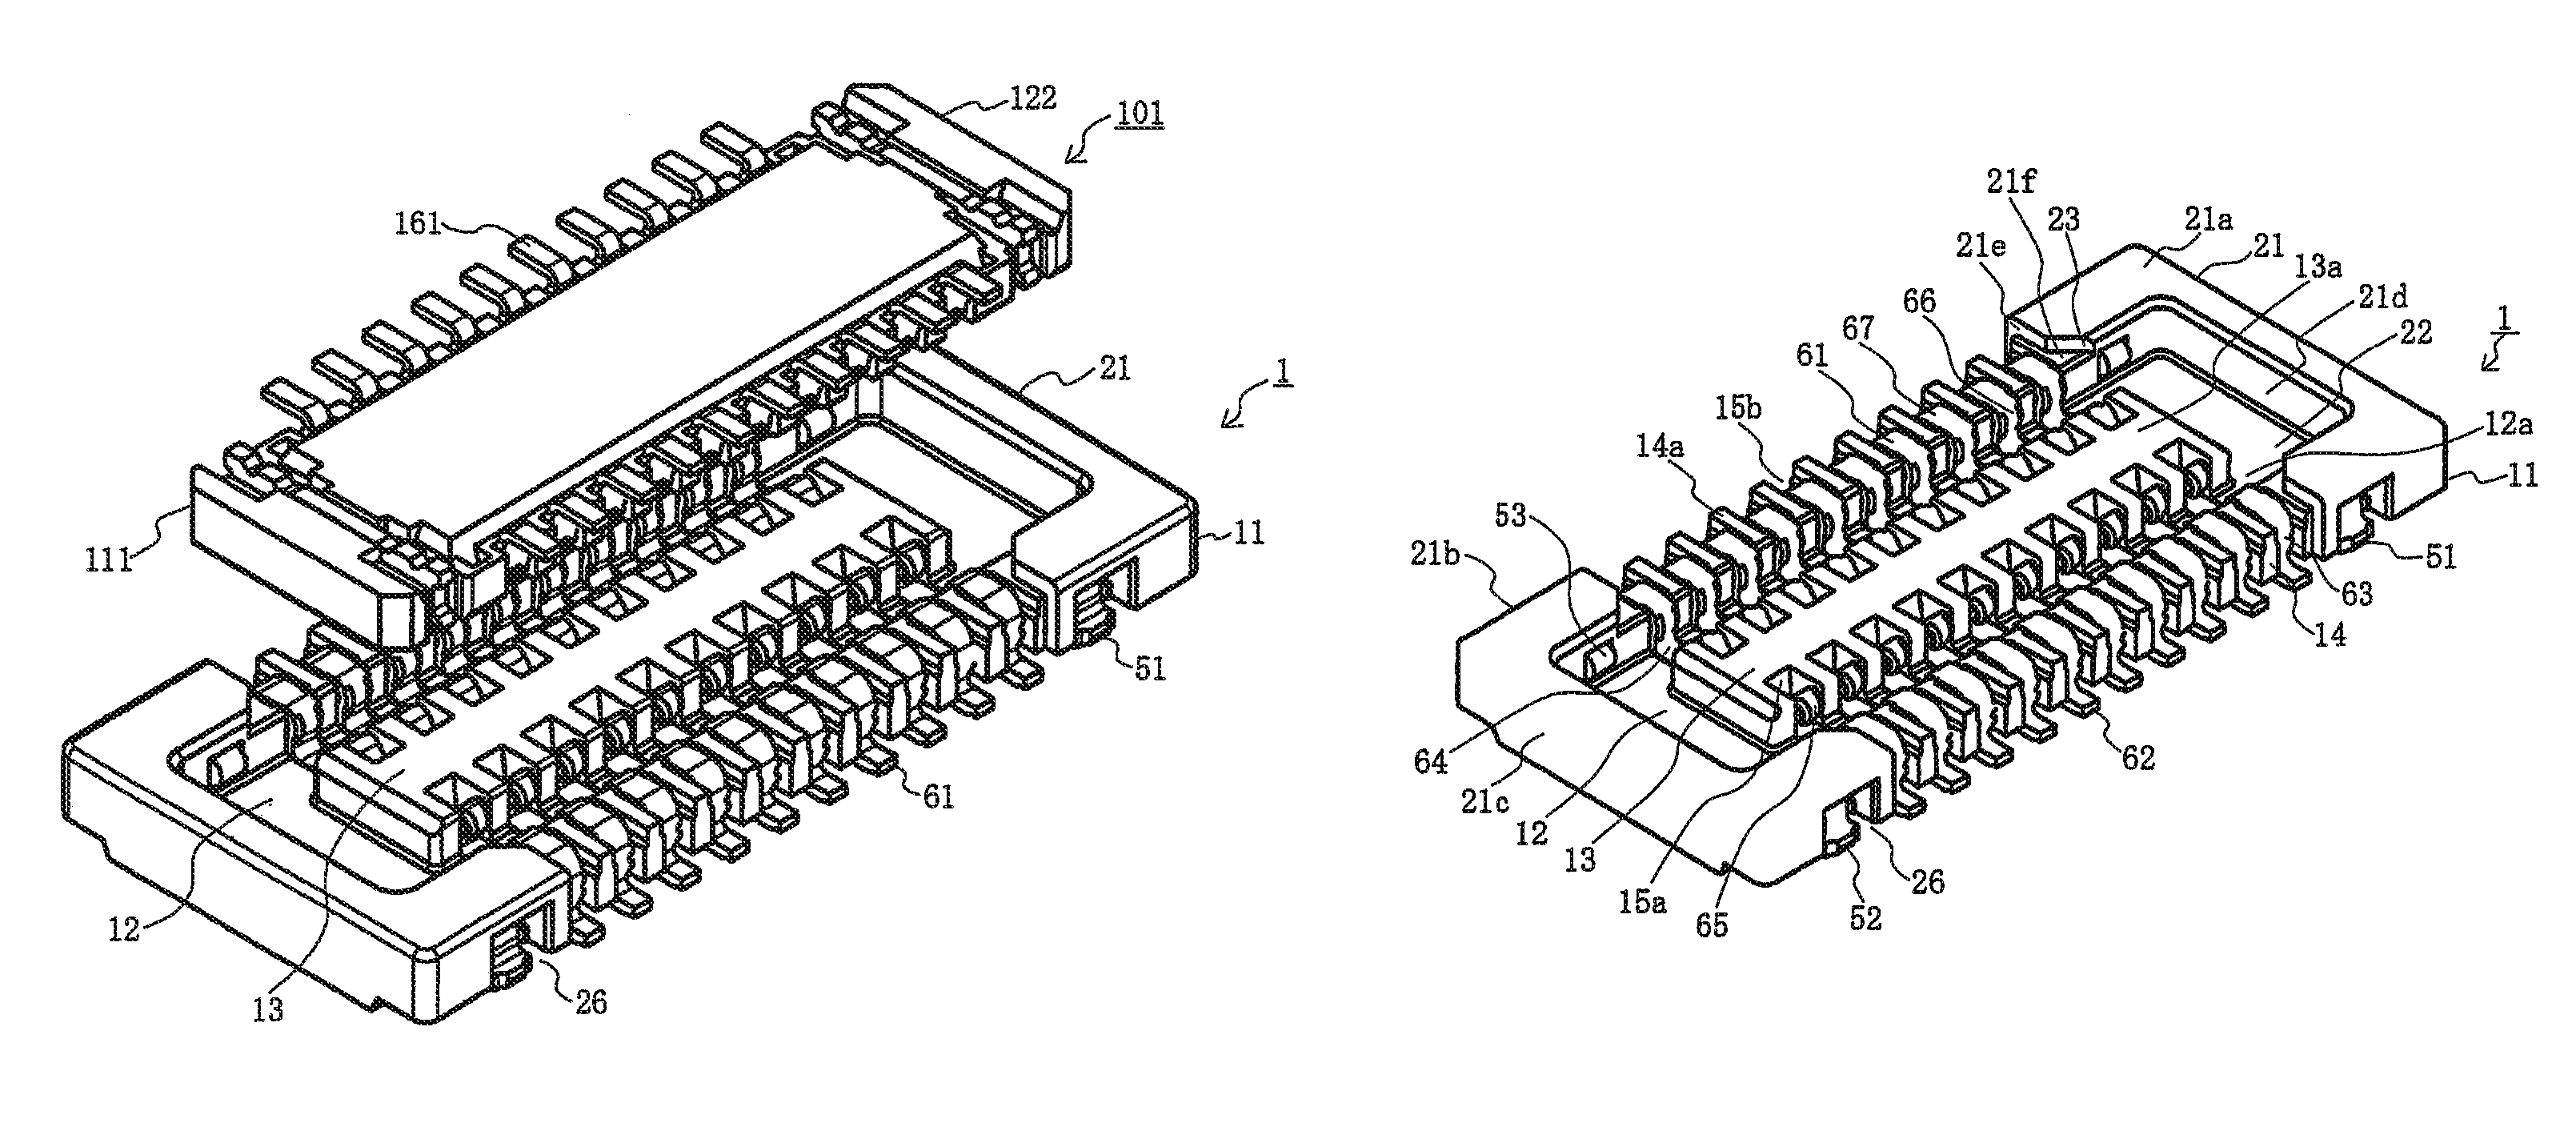 Board-to-board connector having a sidewall portion with a sloped guide surface with cut out